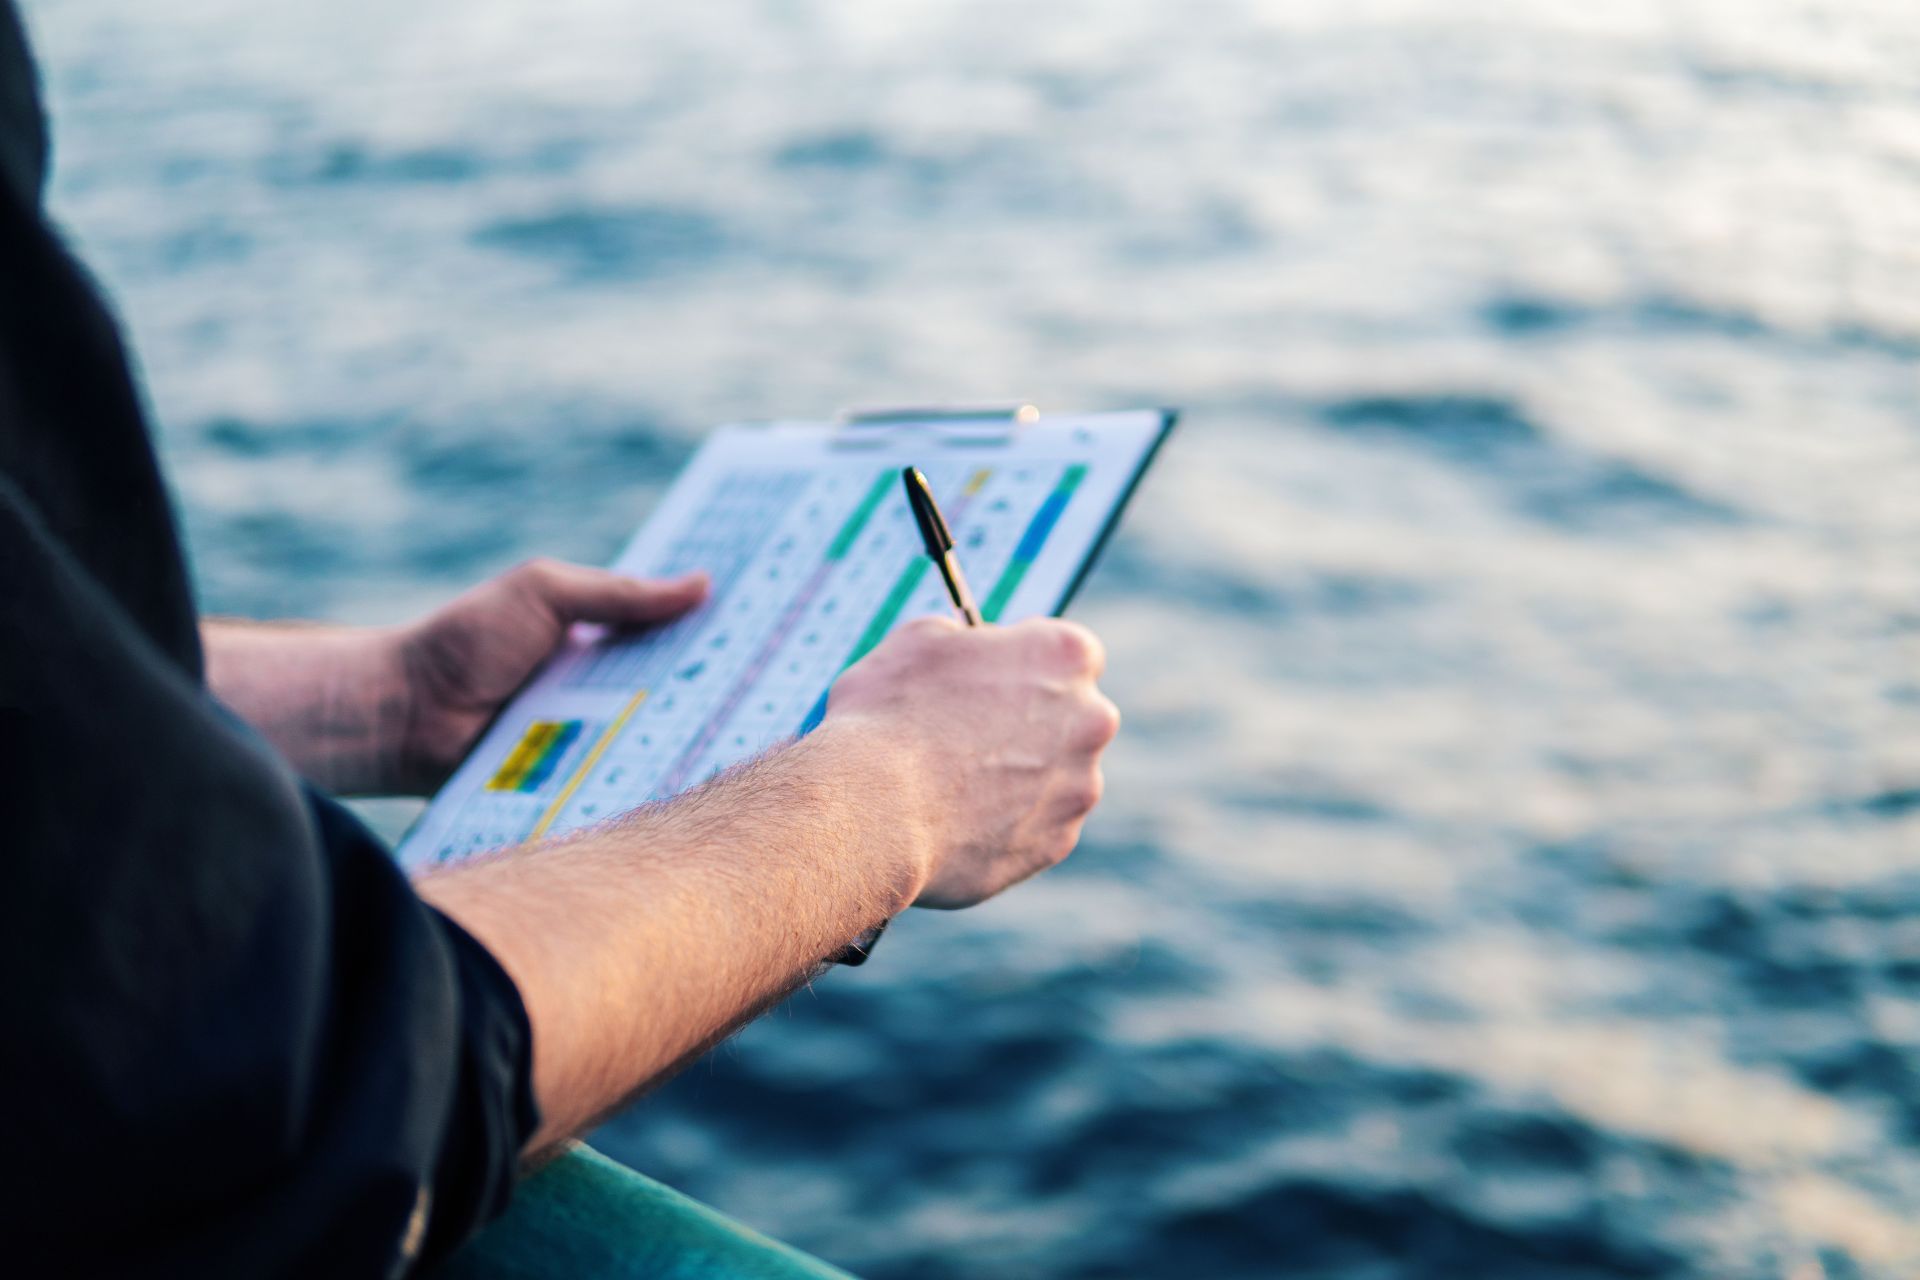 Close-up of a mariner's hands using a navigation chart and dividers on the deck of a ship.